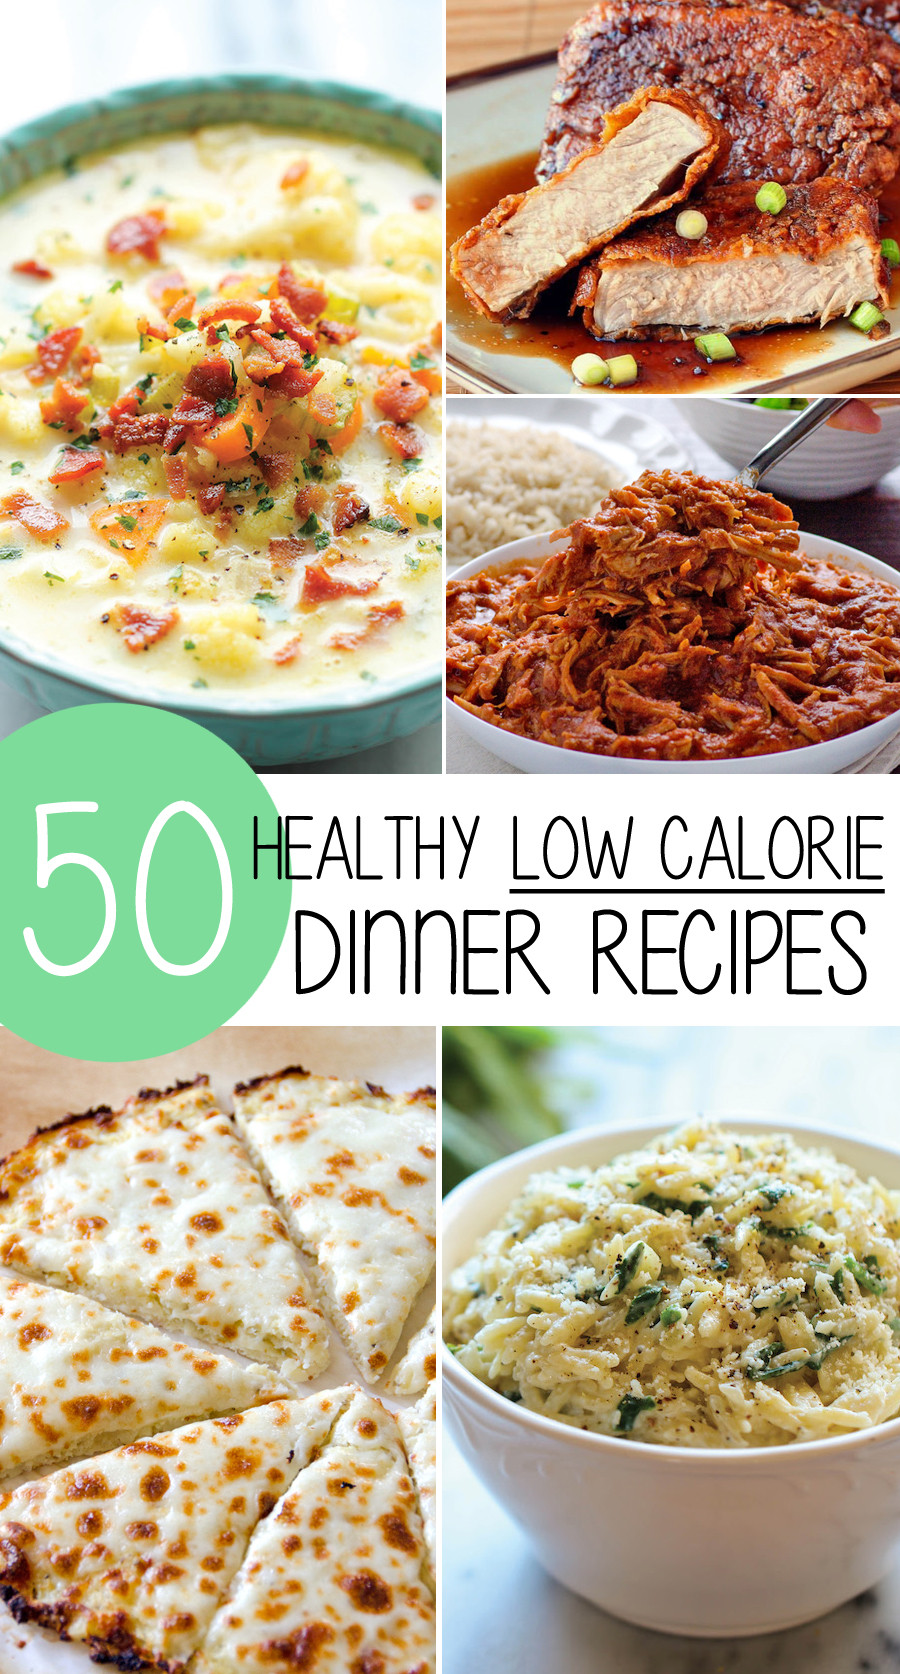 Simple Low Calorie Dinners
 50 Healthy Low Calorie Weight Loss Dinner Recipes